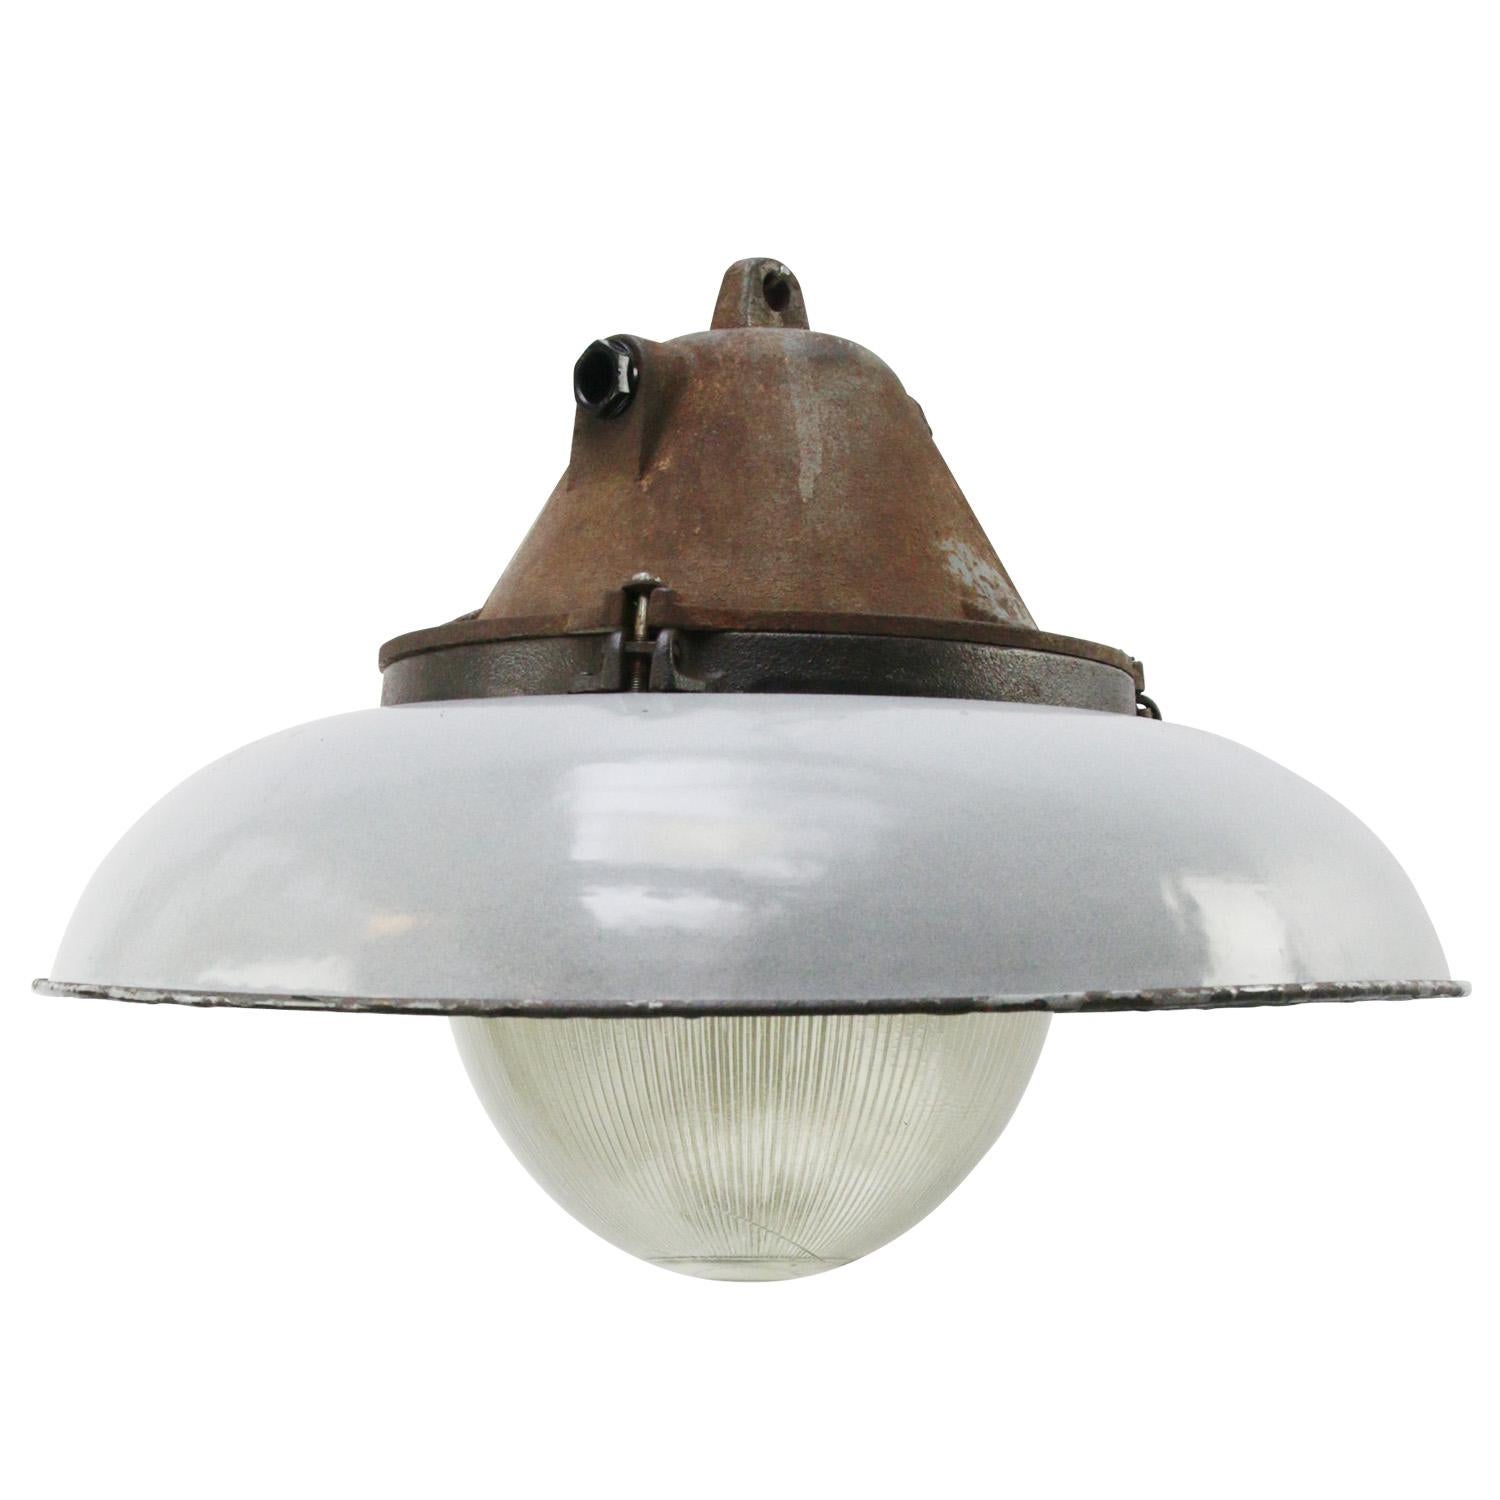 Large Factory pendant.
Light grey enamel white interior.
cast iron top.
Holophane glass.

Weight: 11.80 kg / 26 lb.

Priced per individual item. All lamps have been made suitable by international standards for incandescent light bulbs,